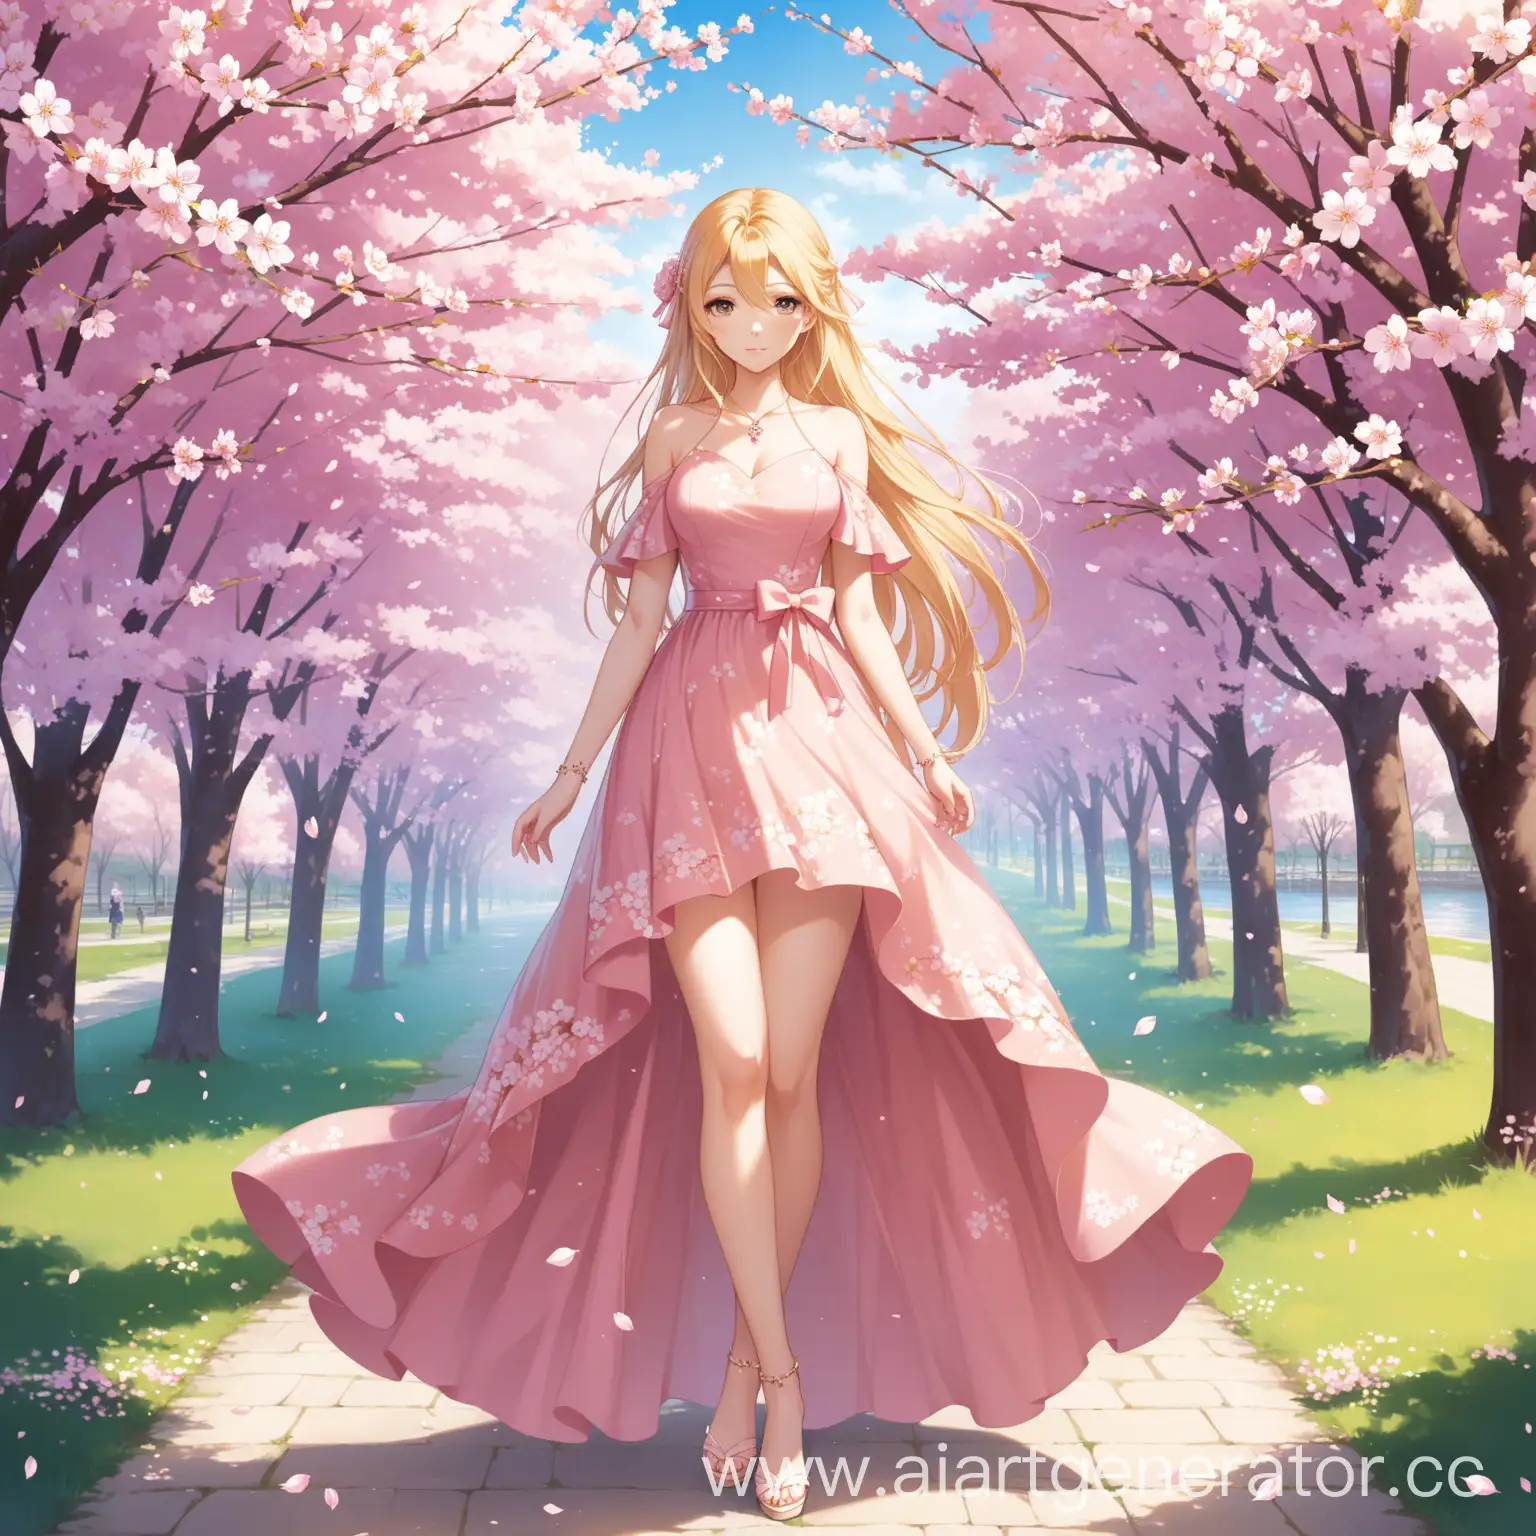 Blonde-Woman-in-Floral-Dress-Among-Cherry-Blossoms